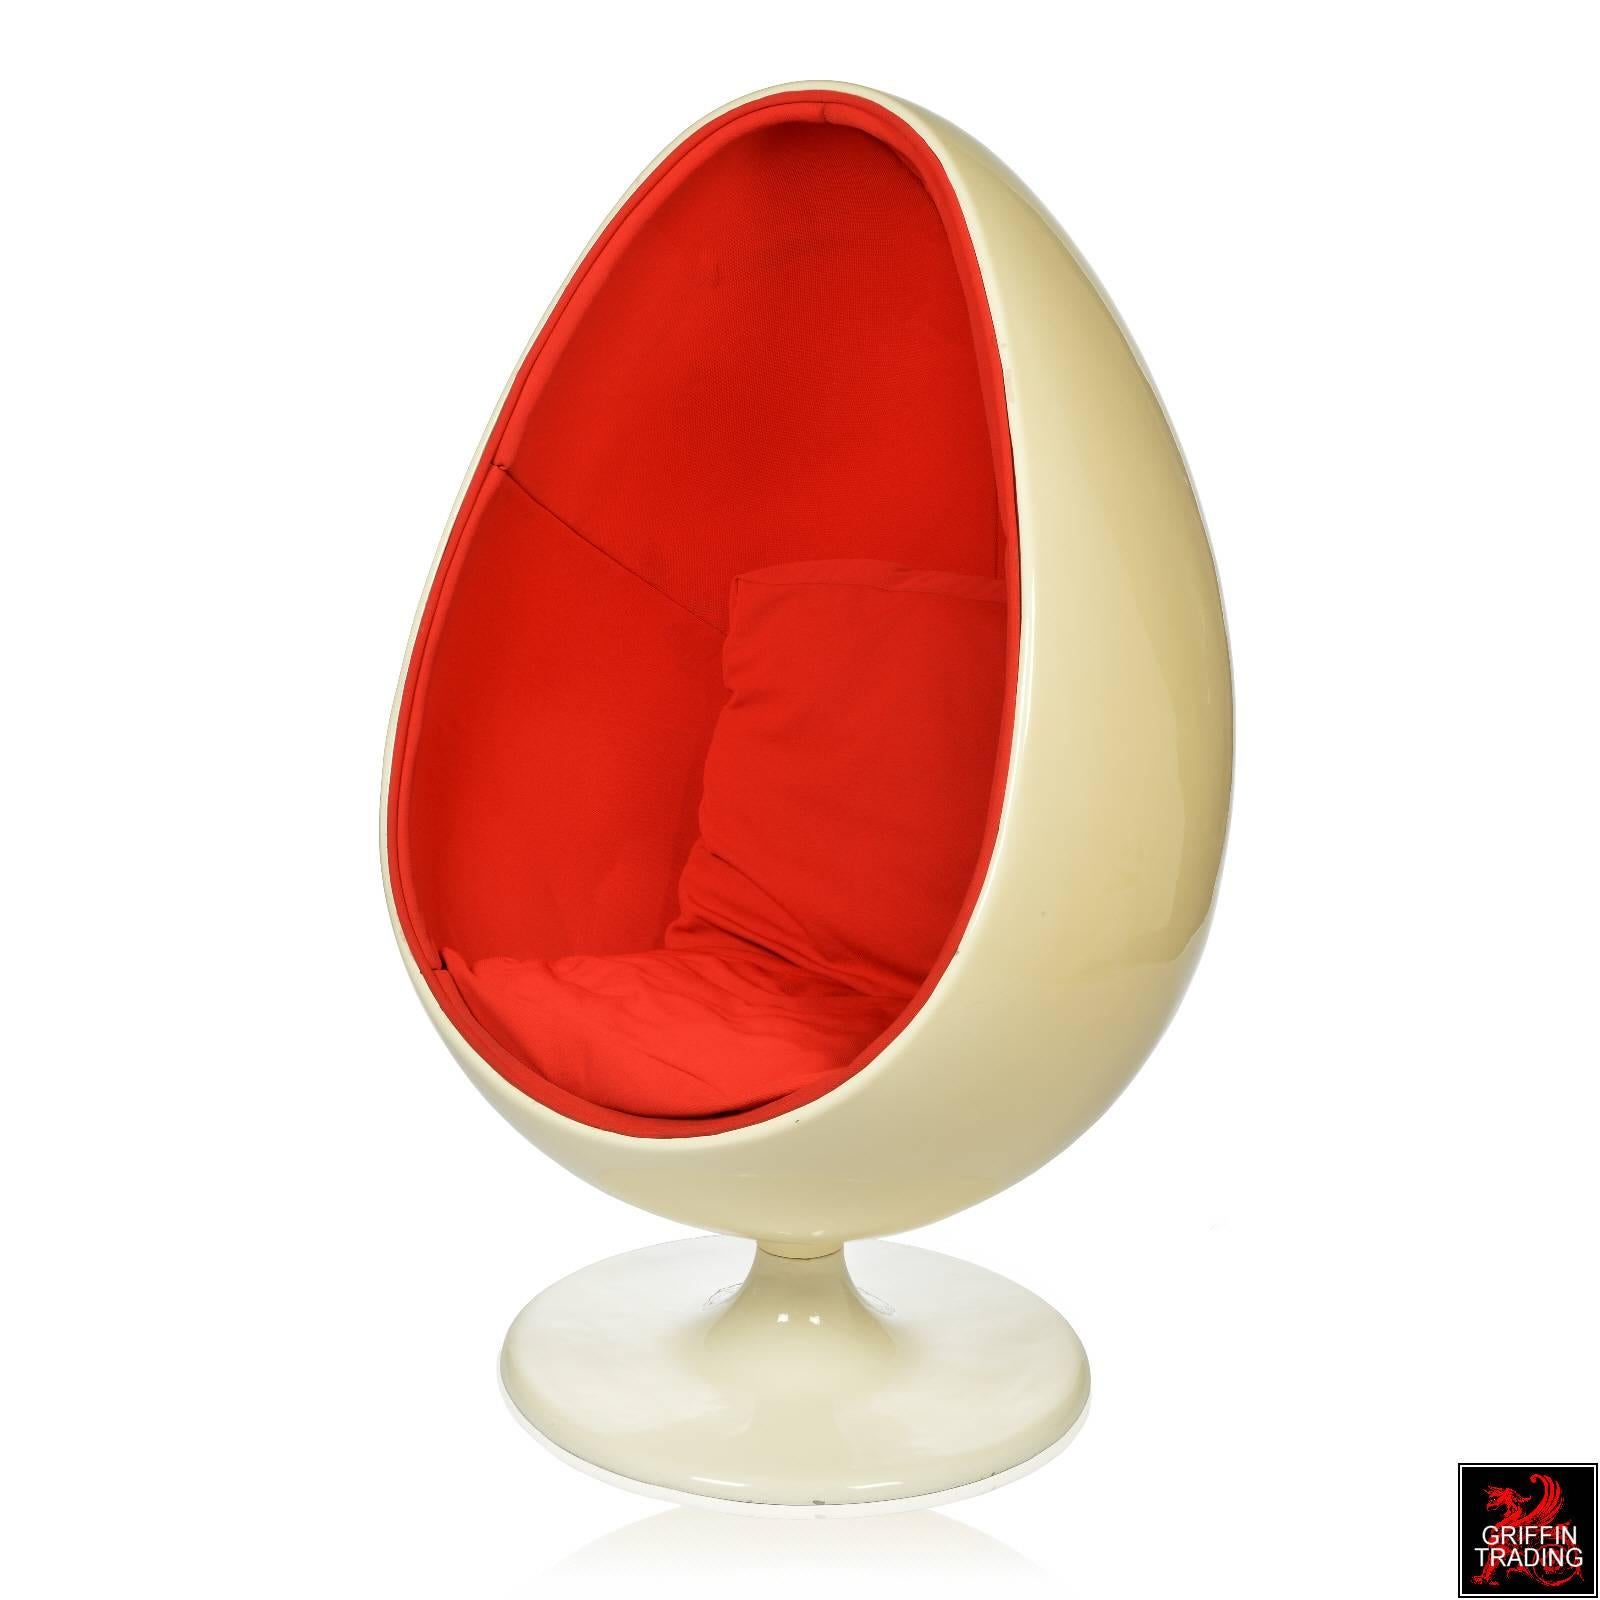 Here it is, the Classic pod chair often referred to as the Egg chair. This is perfect for that Mid-Century modern home or space age home. The orange upholstery has two loose cushions and looks amazing against the off-white color of the egg shaped